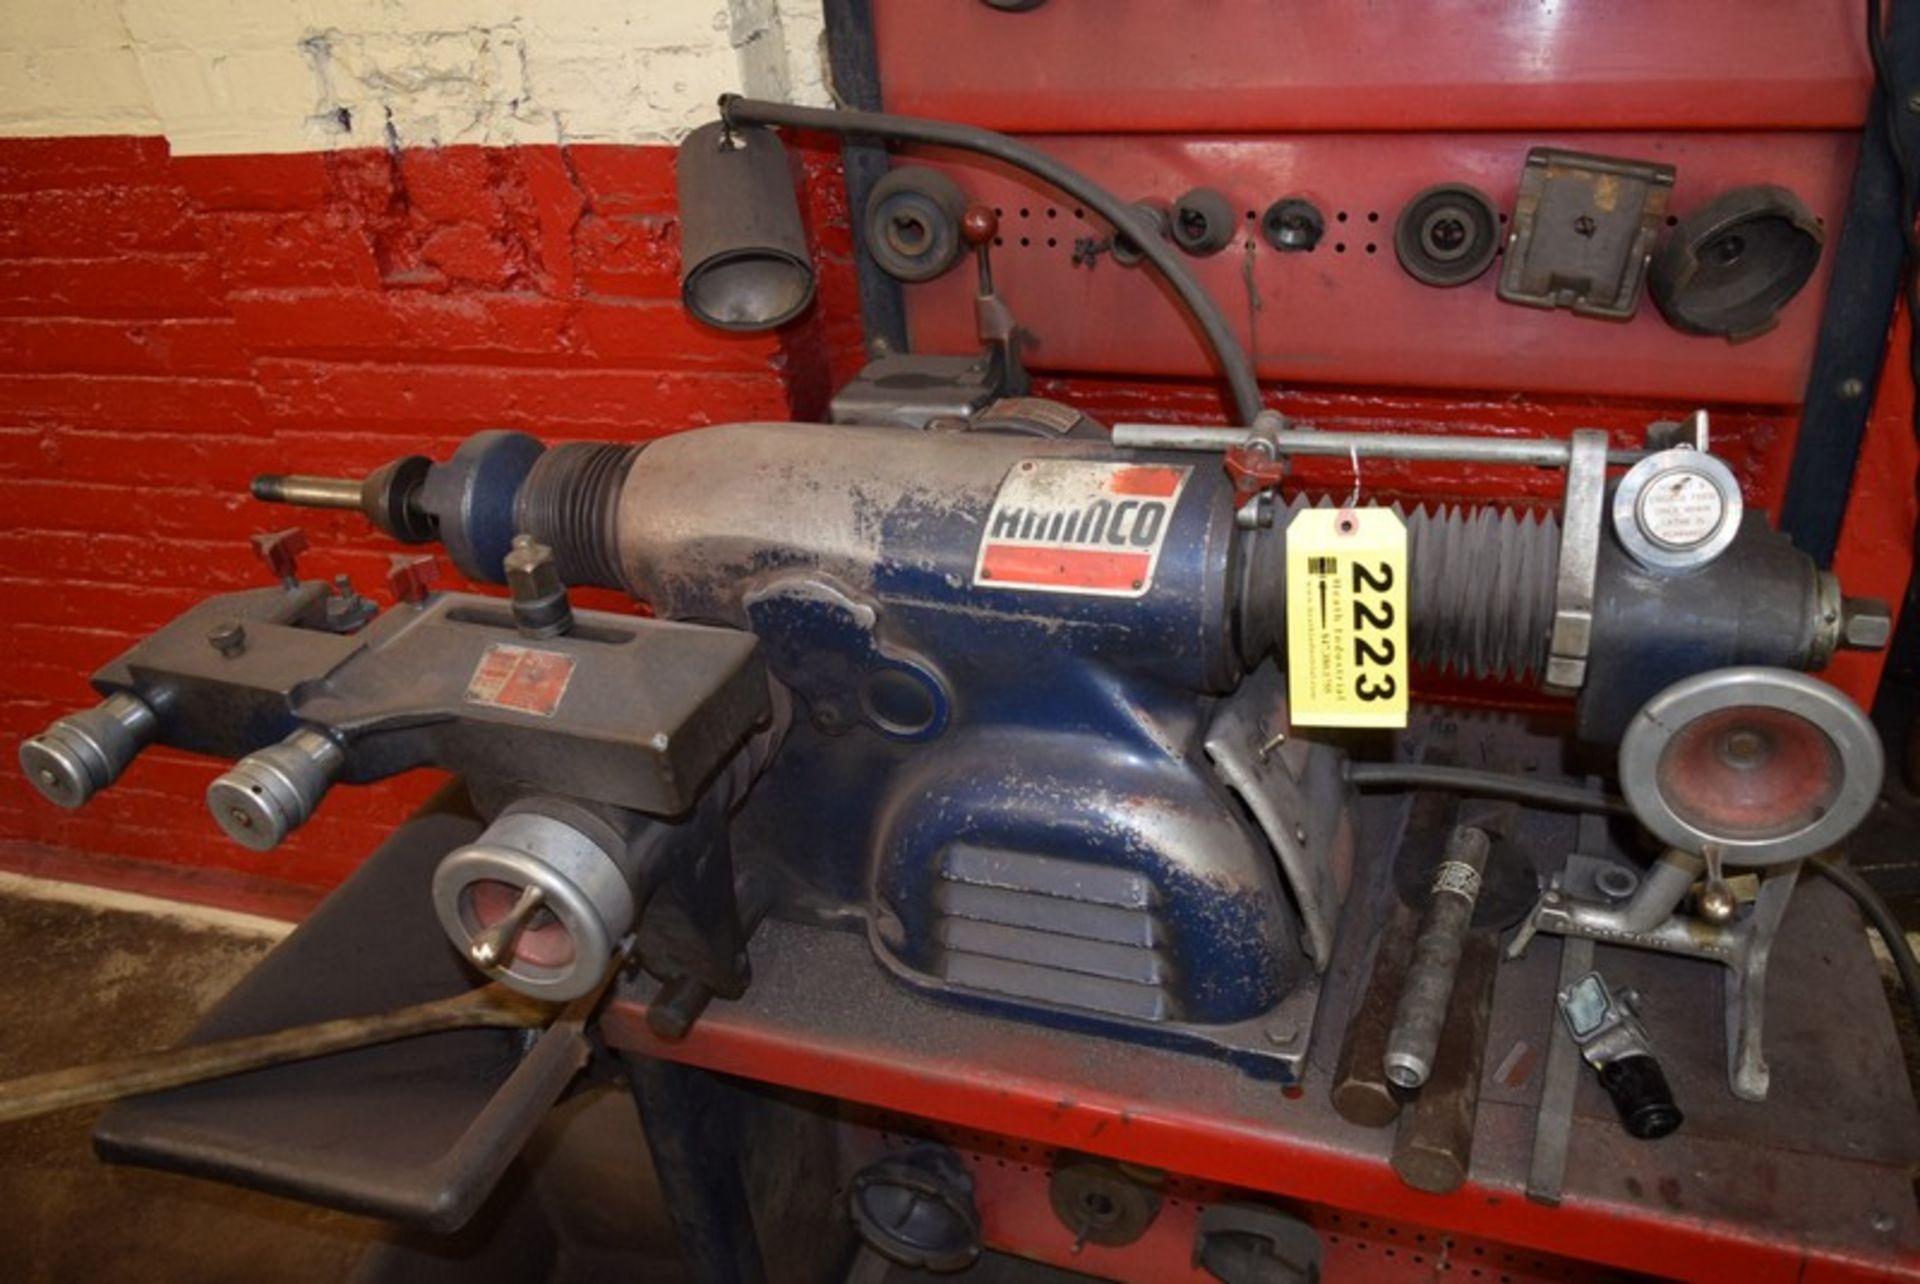 AMMCO BRAKE LATHE S/N: 91264 W/ FACING TOOL ATTACHMENT ON AMMCO BENCH - Image 3 of 7